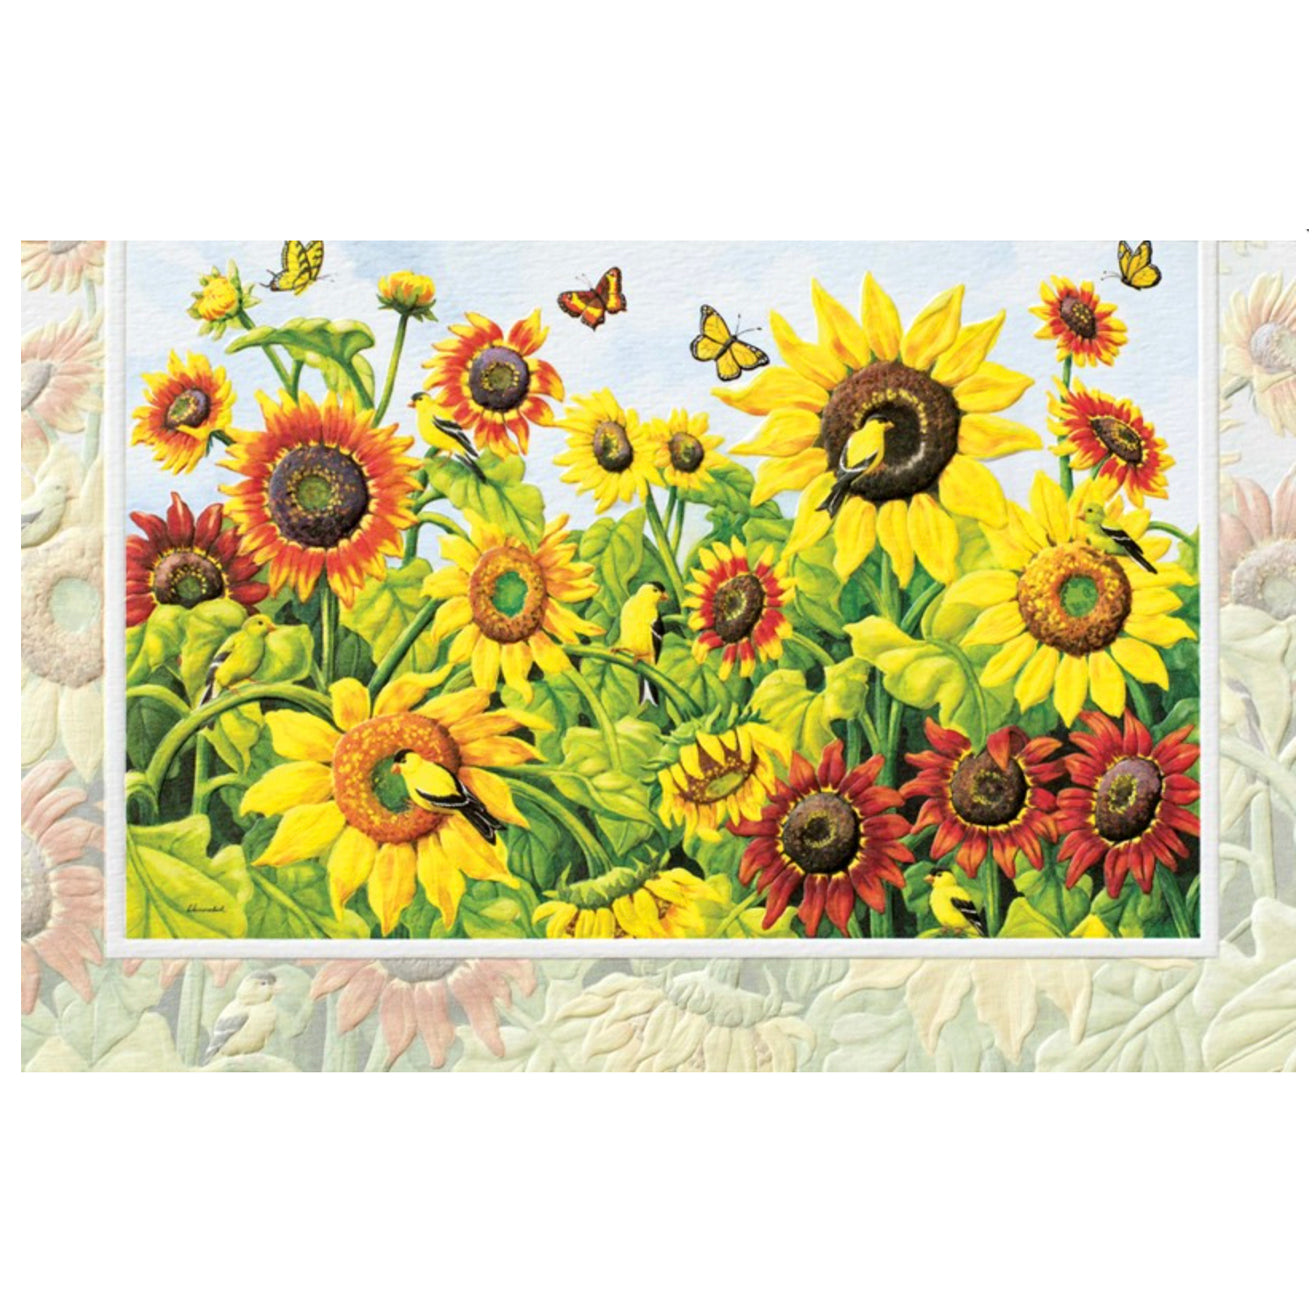 Sunflowers and Goldfinches Birthday Card